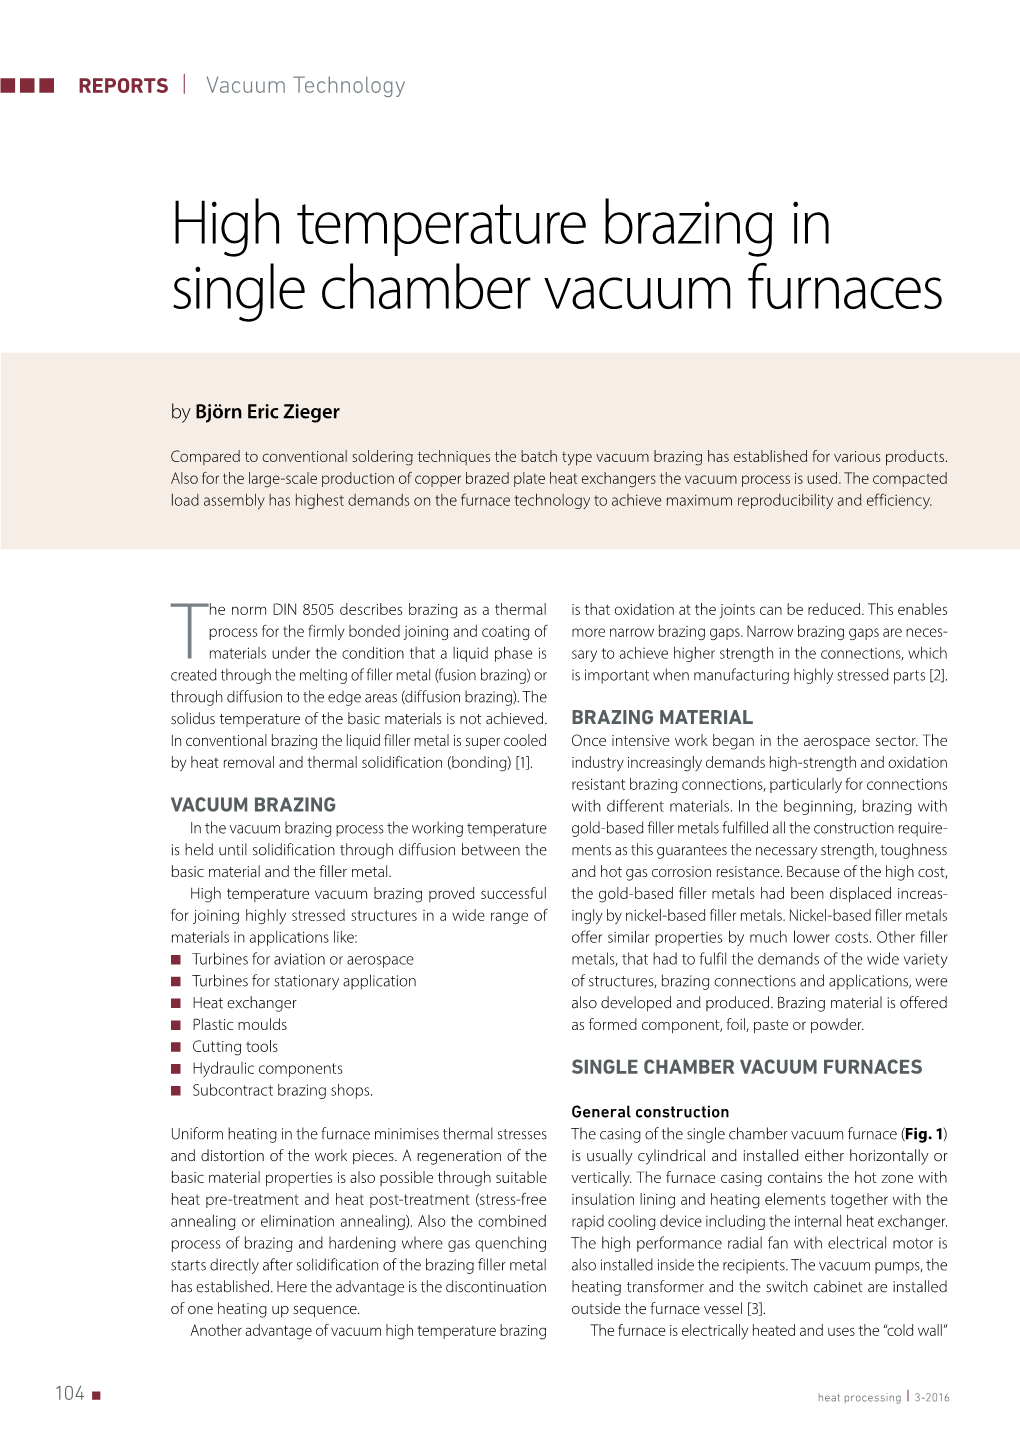 High Temperature Brazing in Single Chamber Vacuum Furnaces